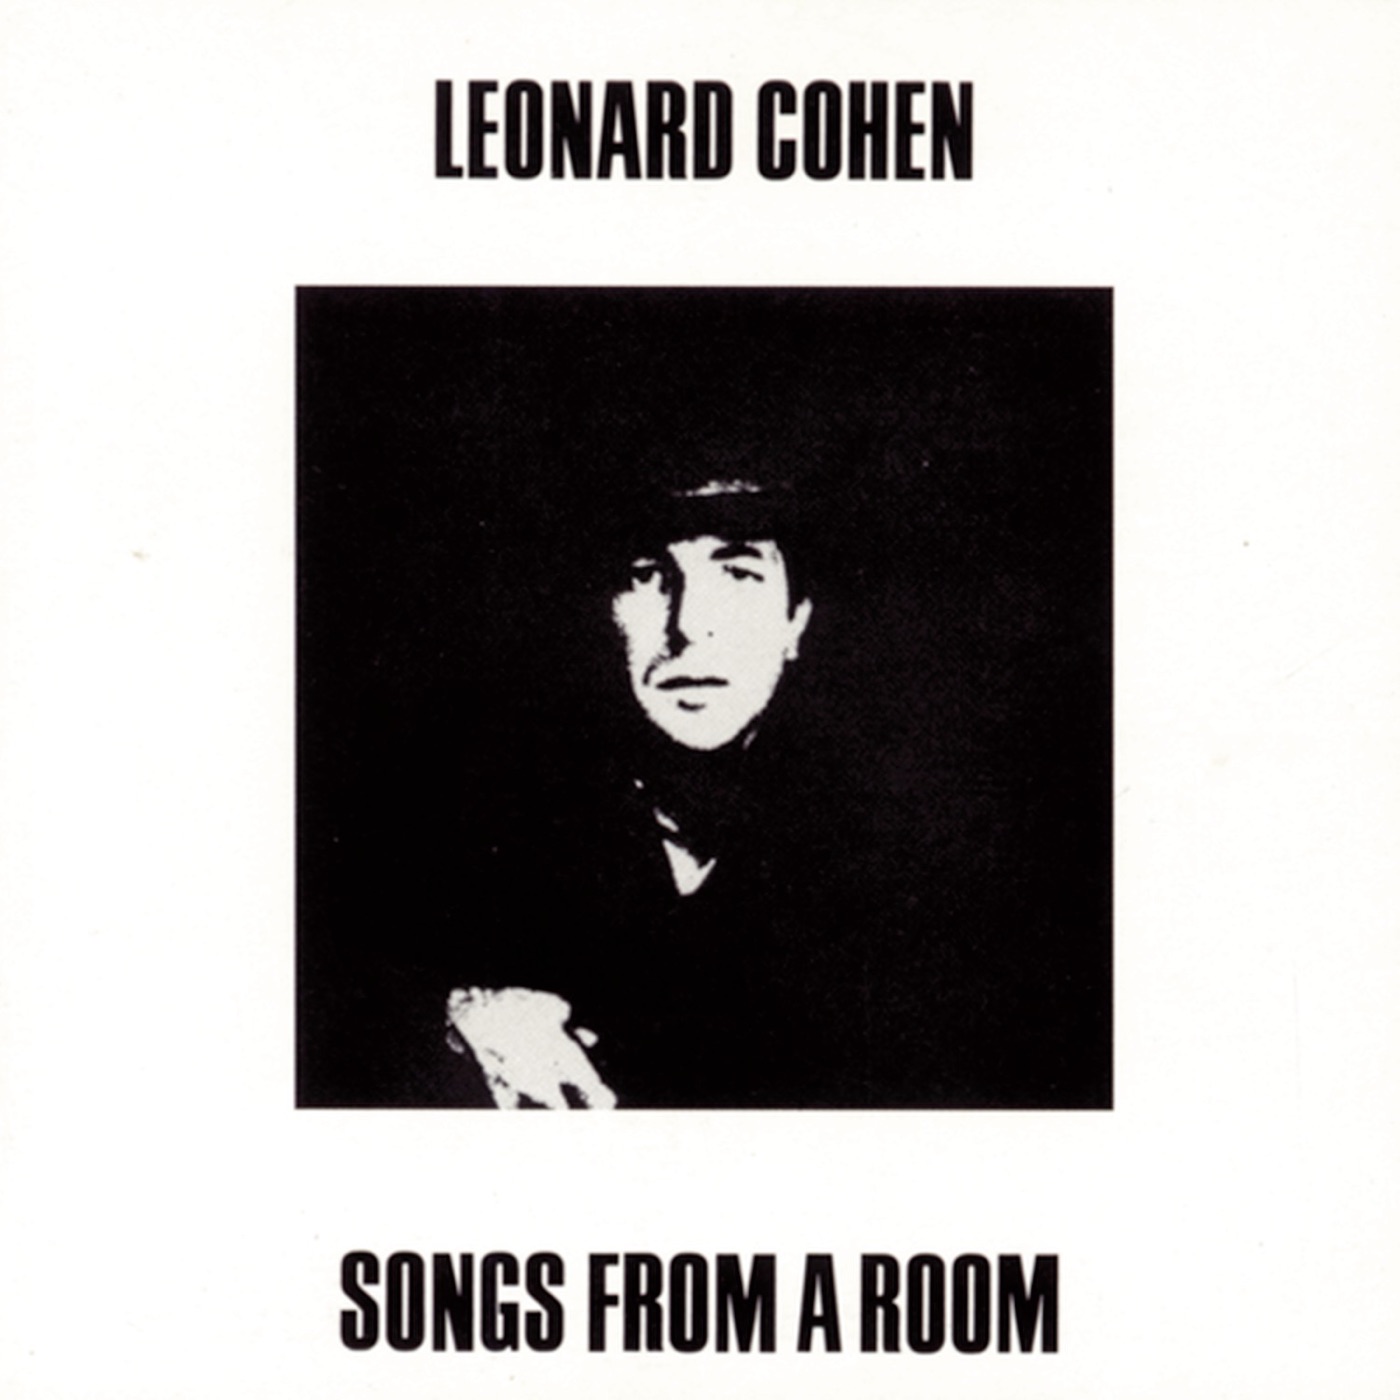 Songs from a Room by Leonard Cohen